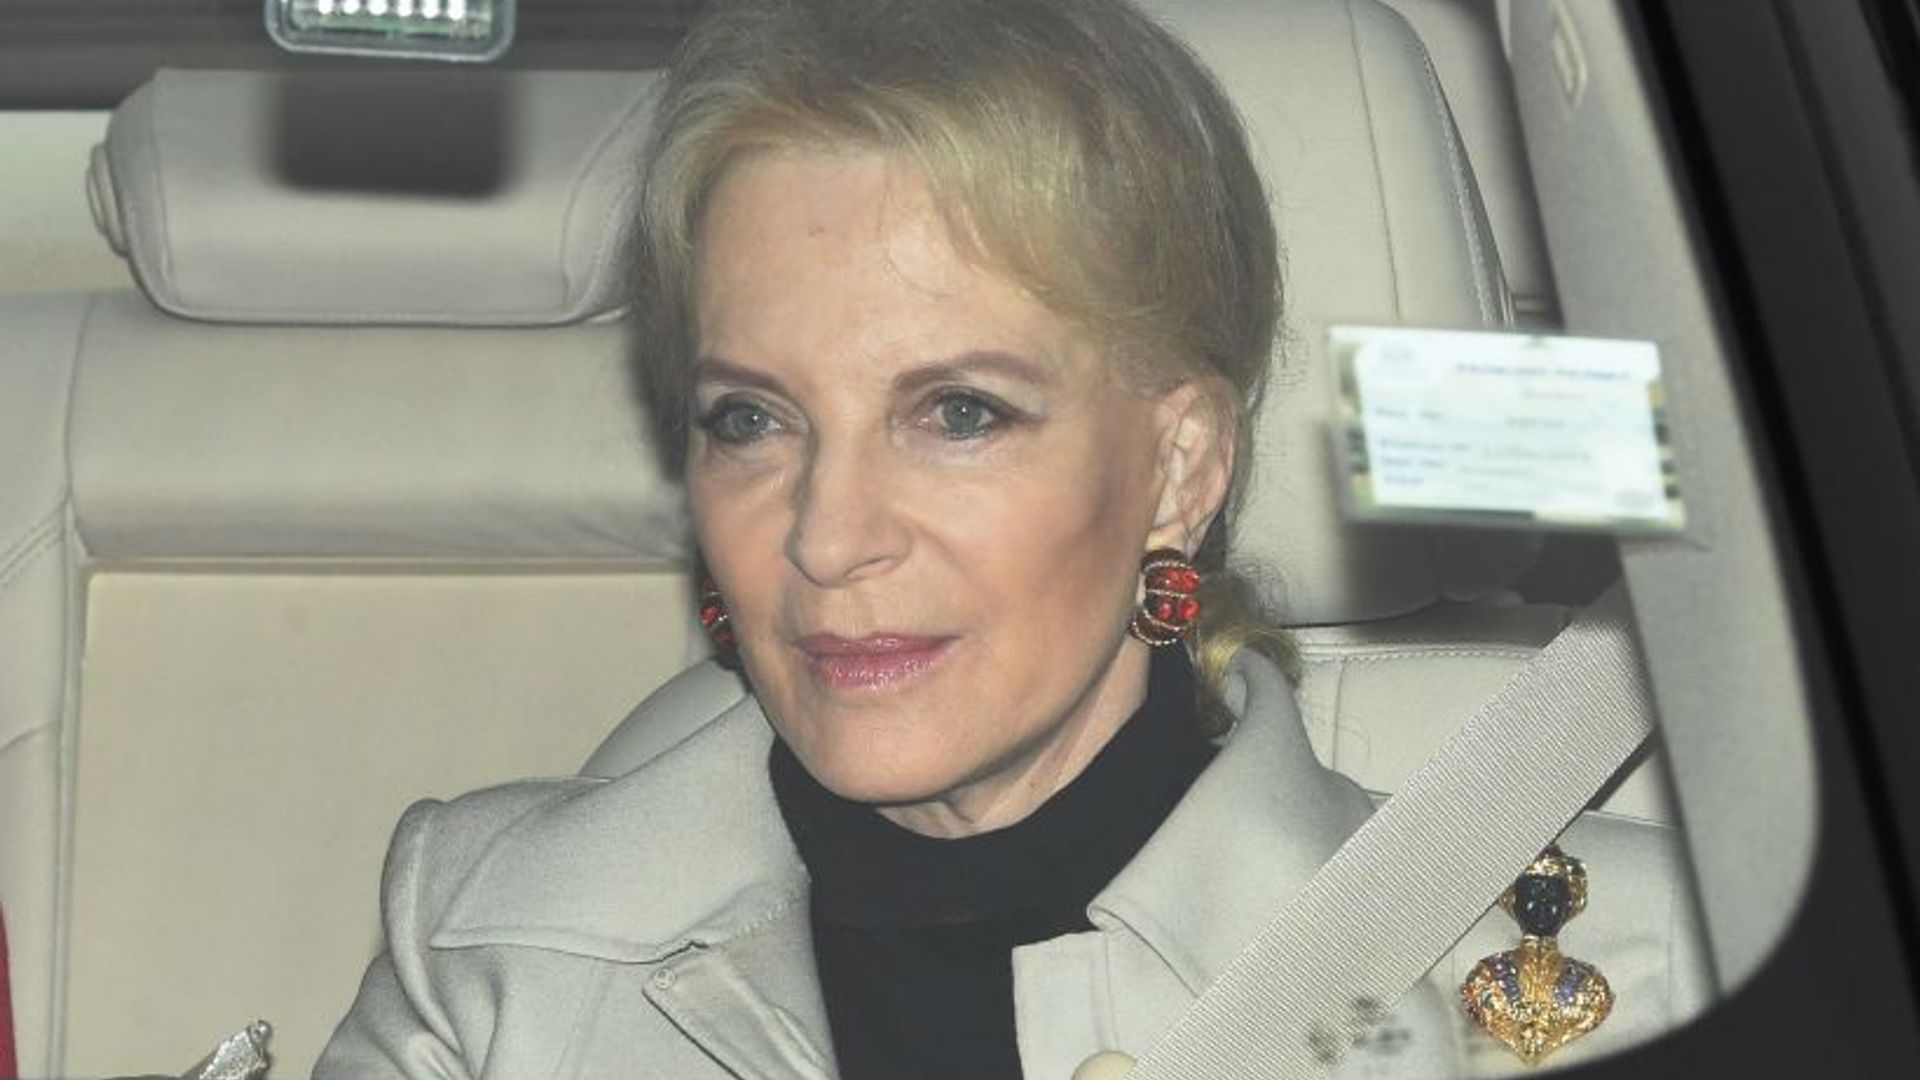 Princess Michael of Kent 'very sorry' about wearing controversial brooch to Queen's Christmas lunch